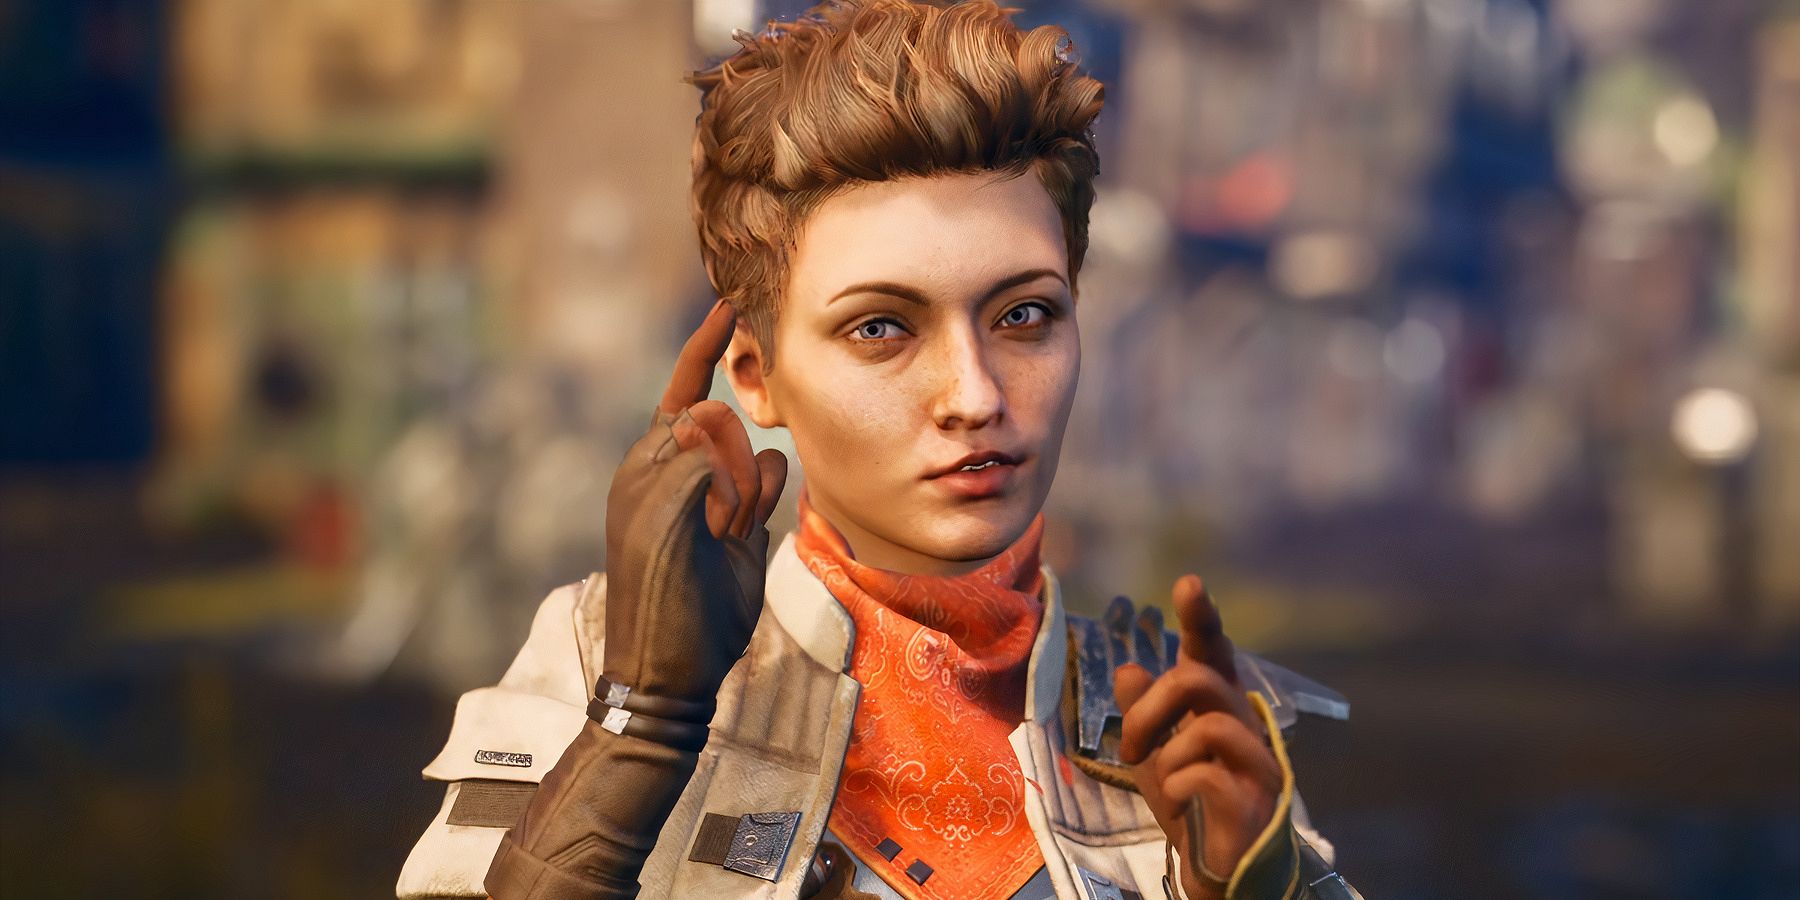 Ellie using finger guns in The Outer Worlds